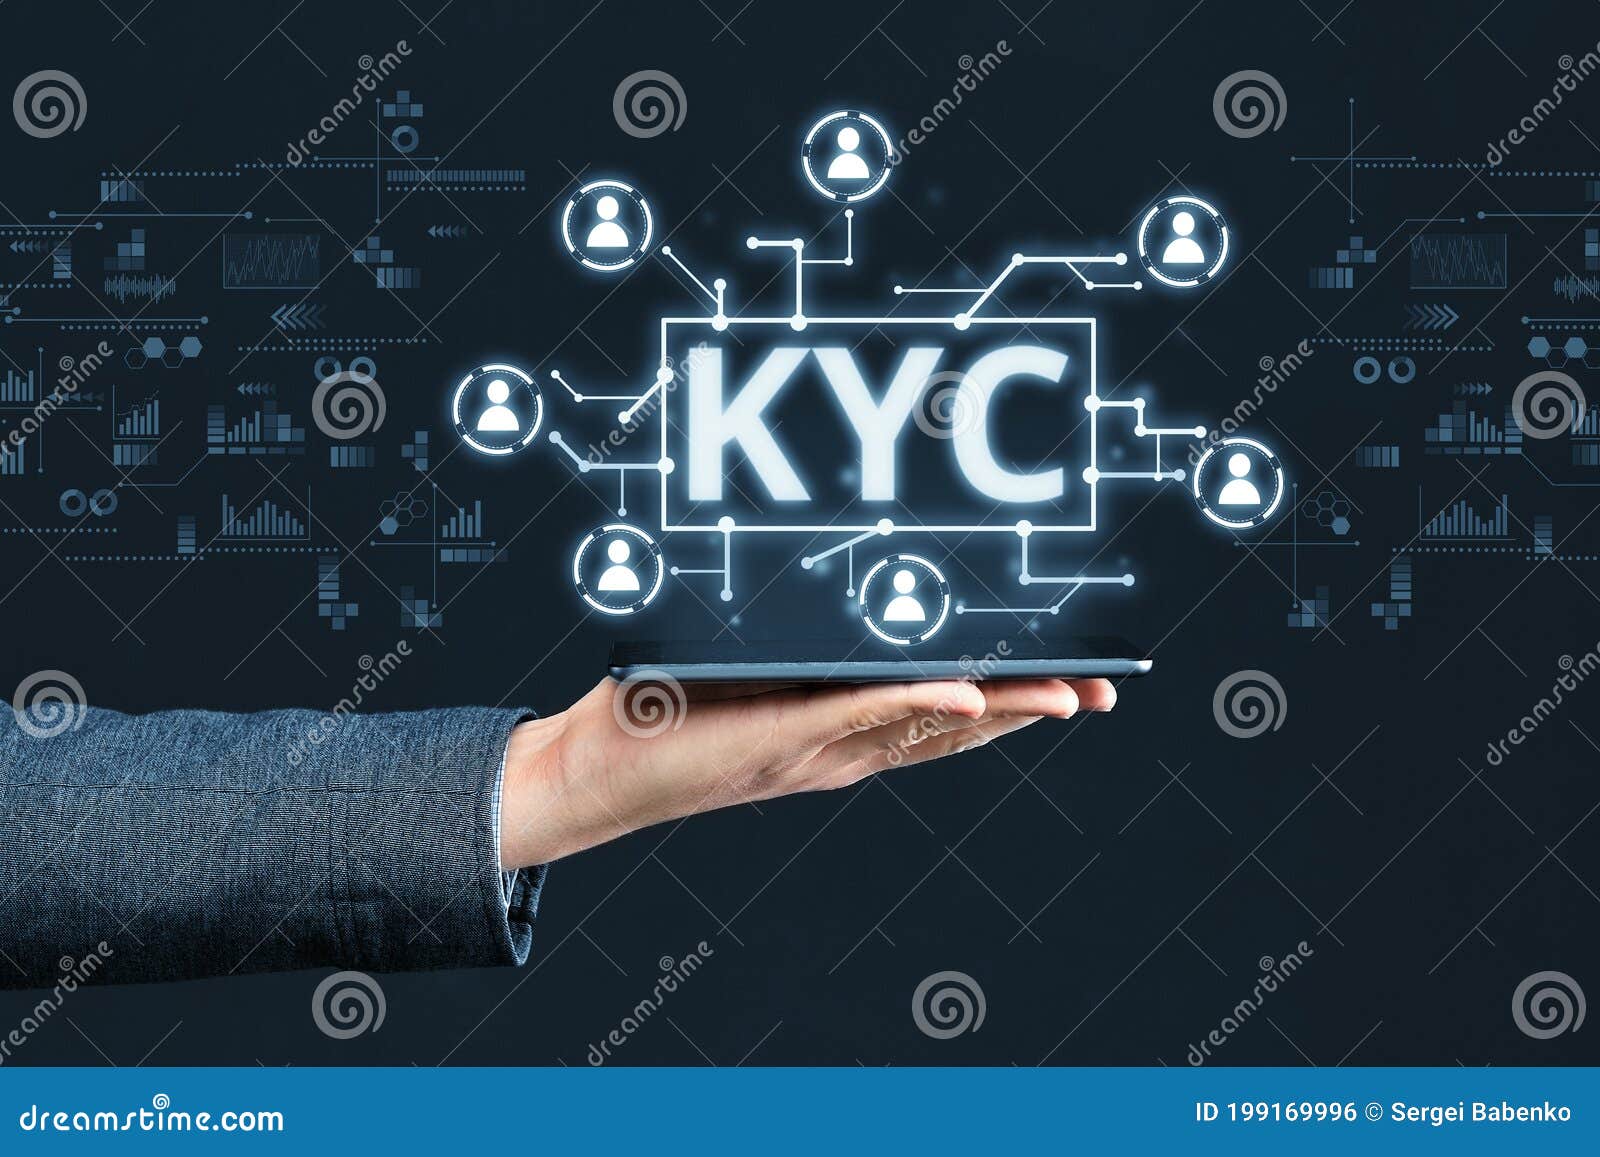 abstract digital display with concept image kyc